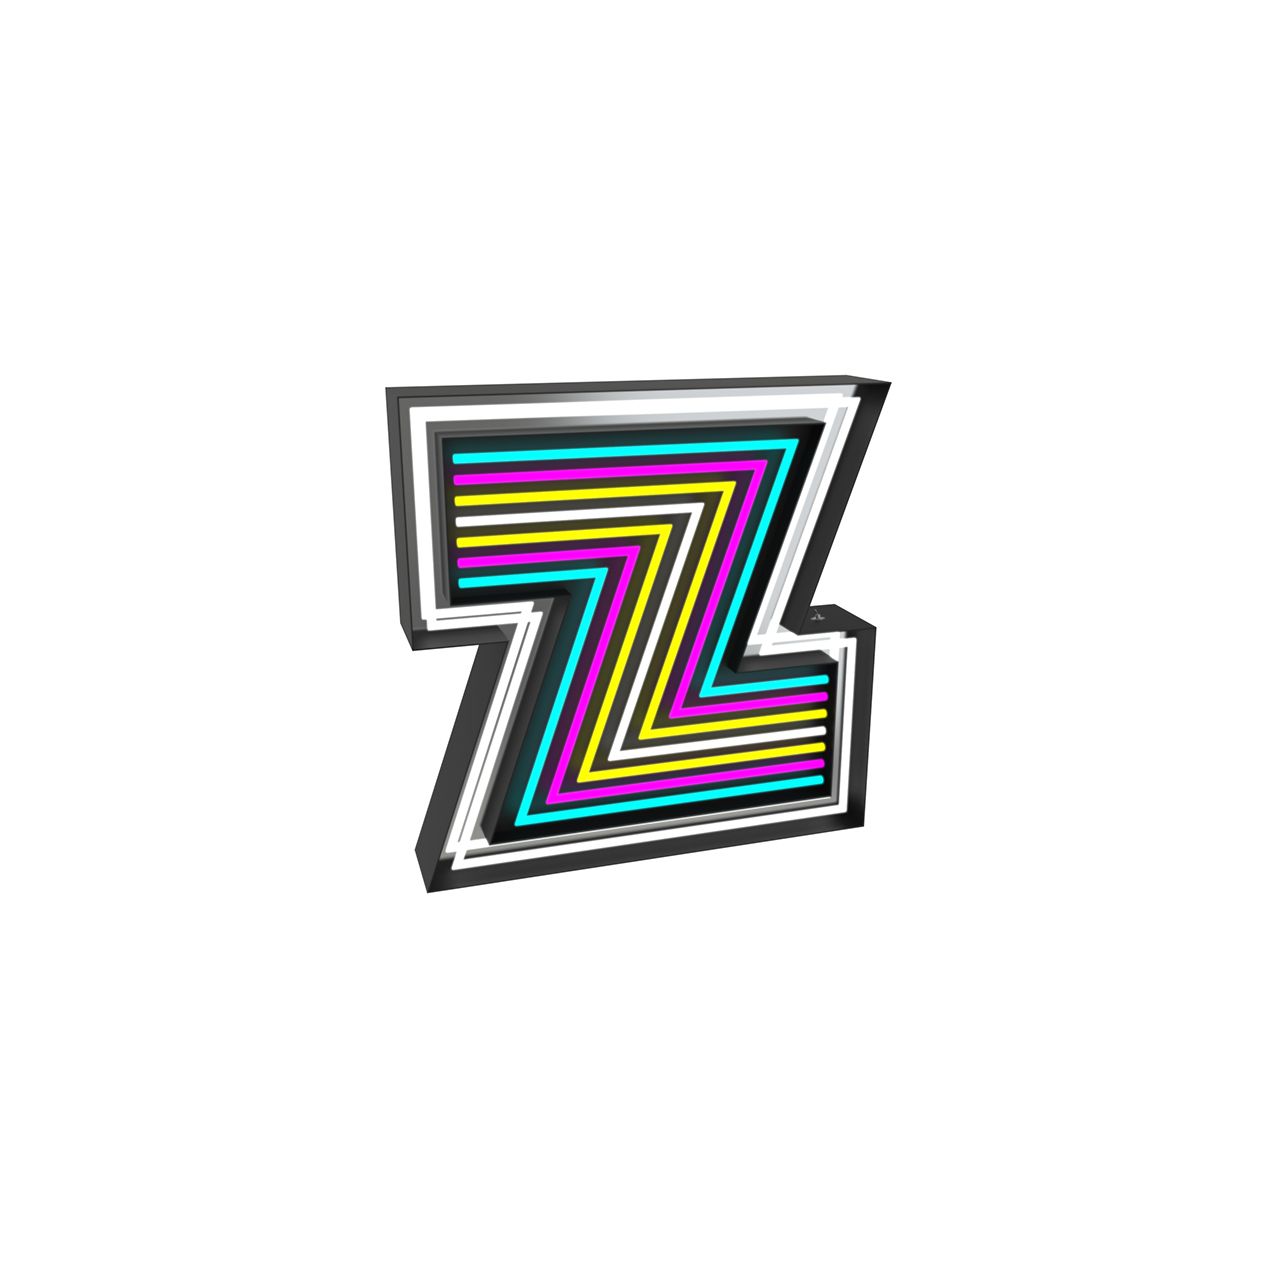 LETTER Z GRAPHIC LAMP